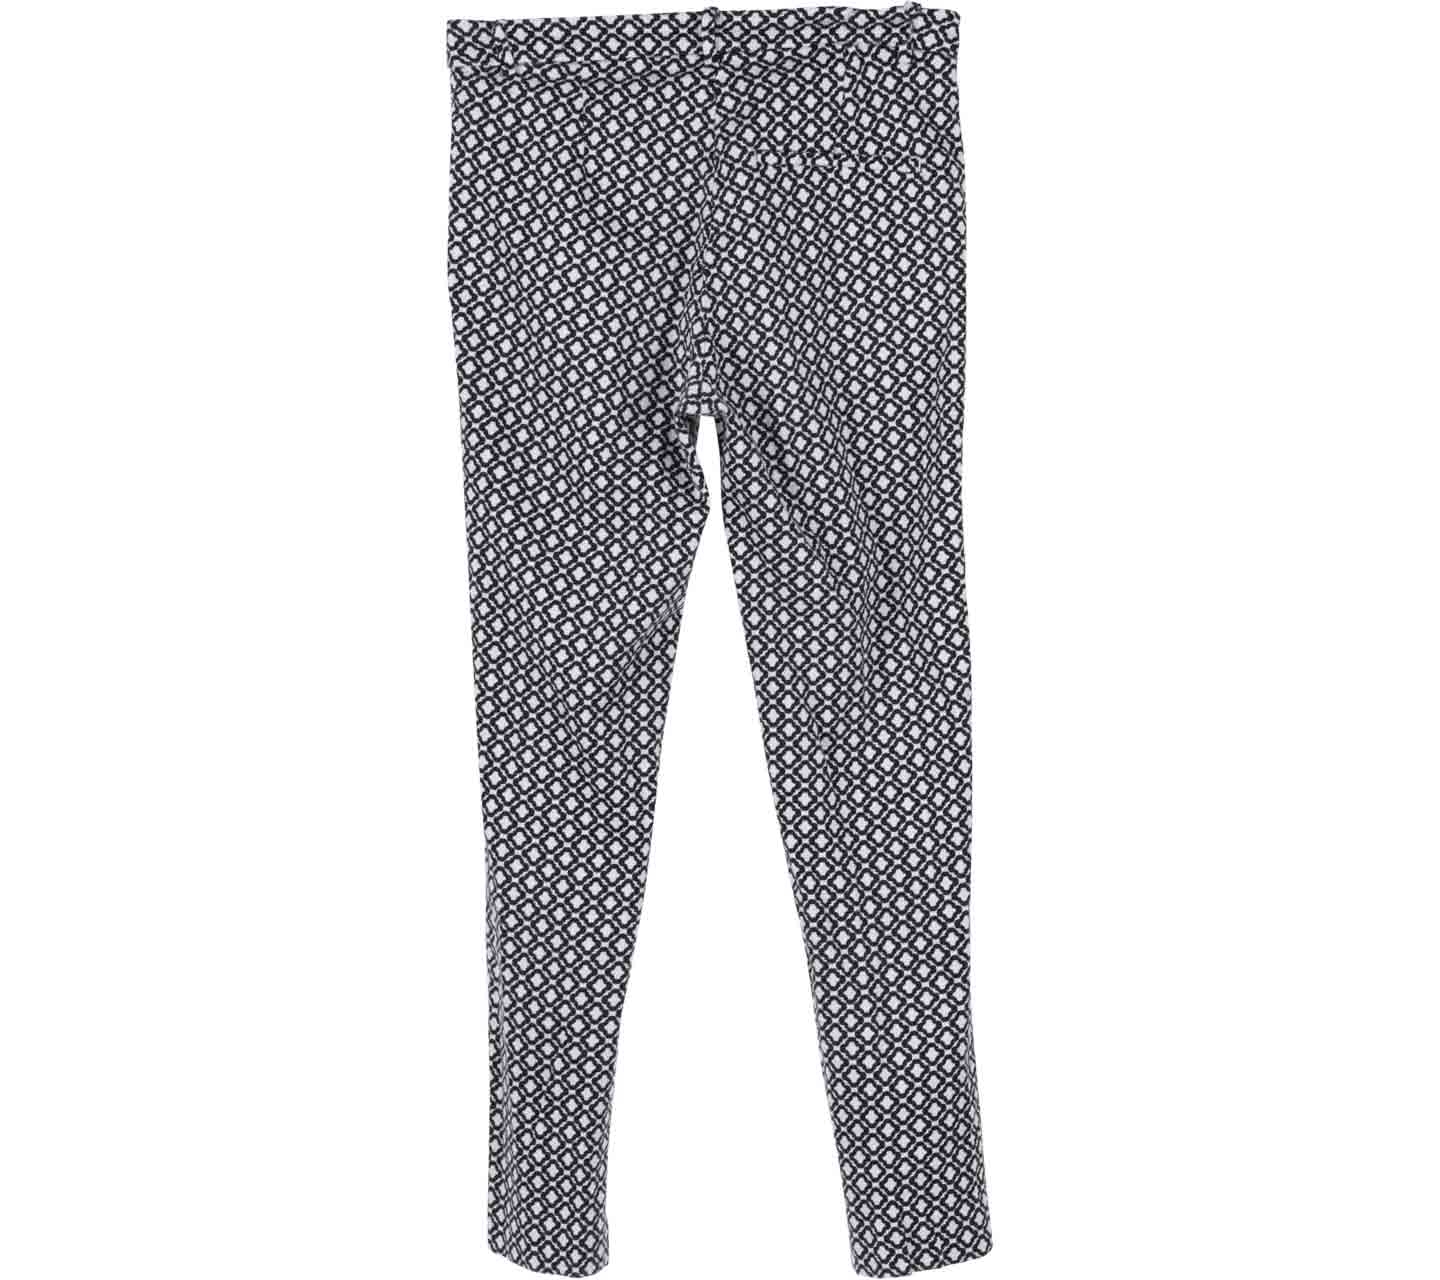 H&M White Patterned Pants